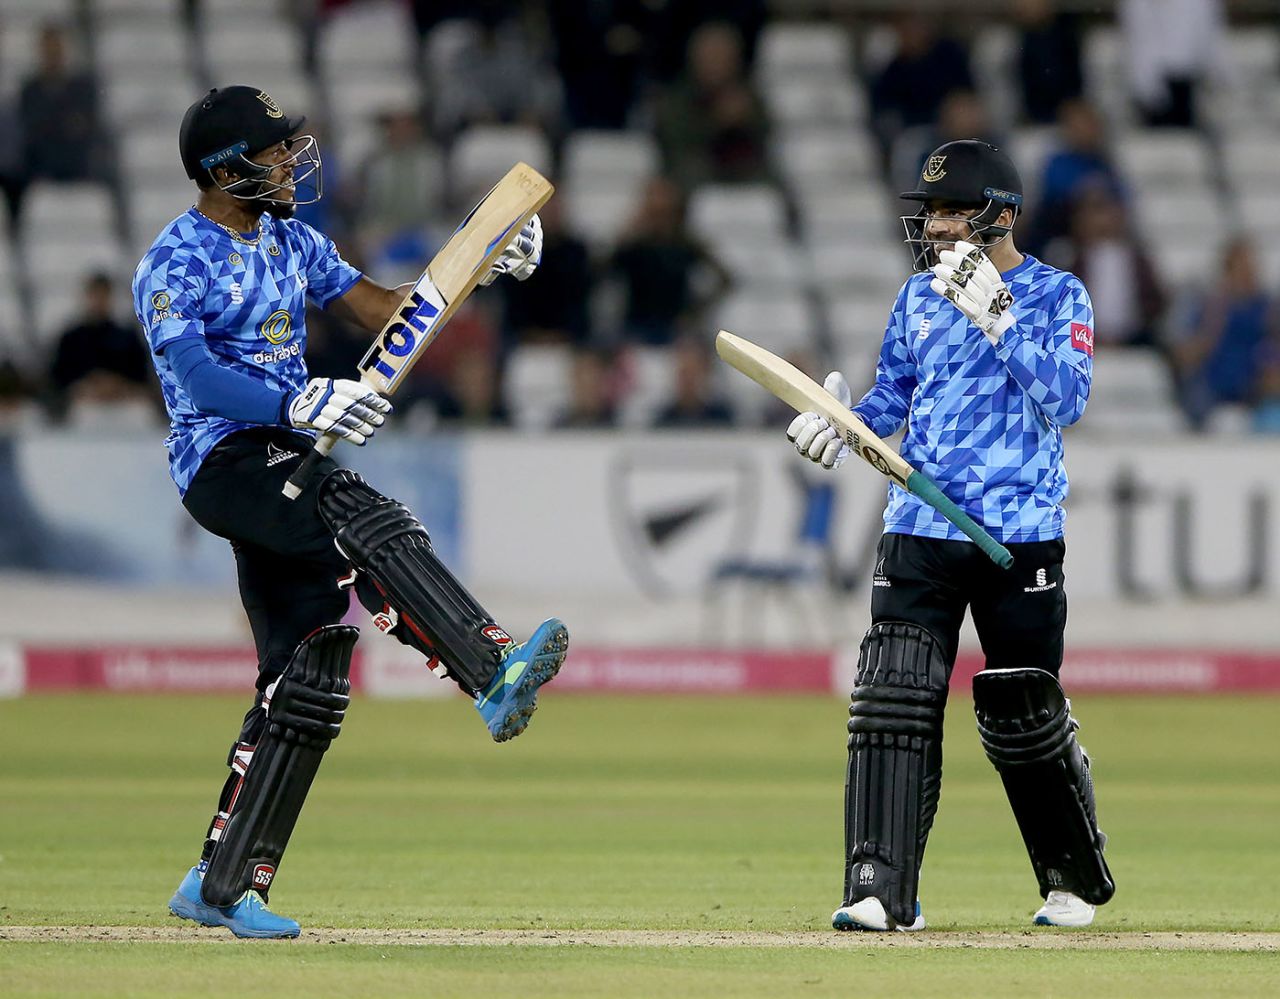 Rashid Khan and Chris Jordan celebrate after sealing Sussex's win, Yorkshire vs Sussex, Chester-le-Street, Vitality T20 Blast quarter-final, August 24, 2021